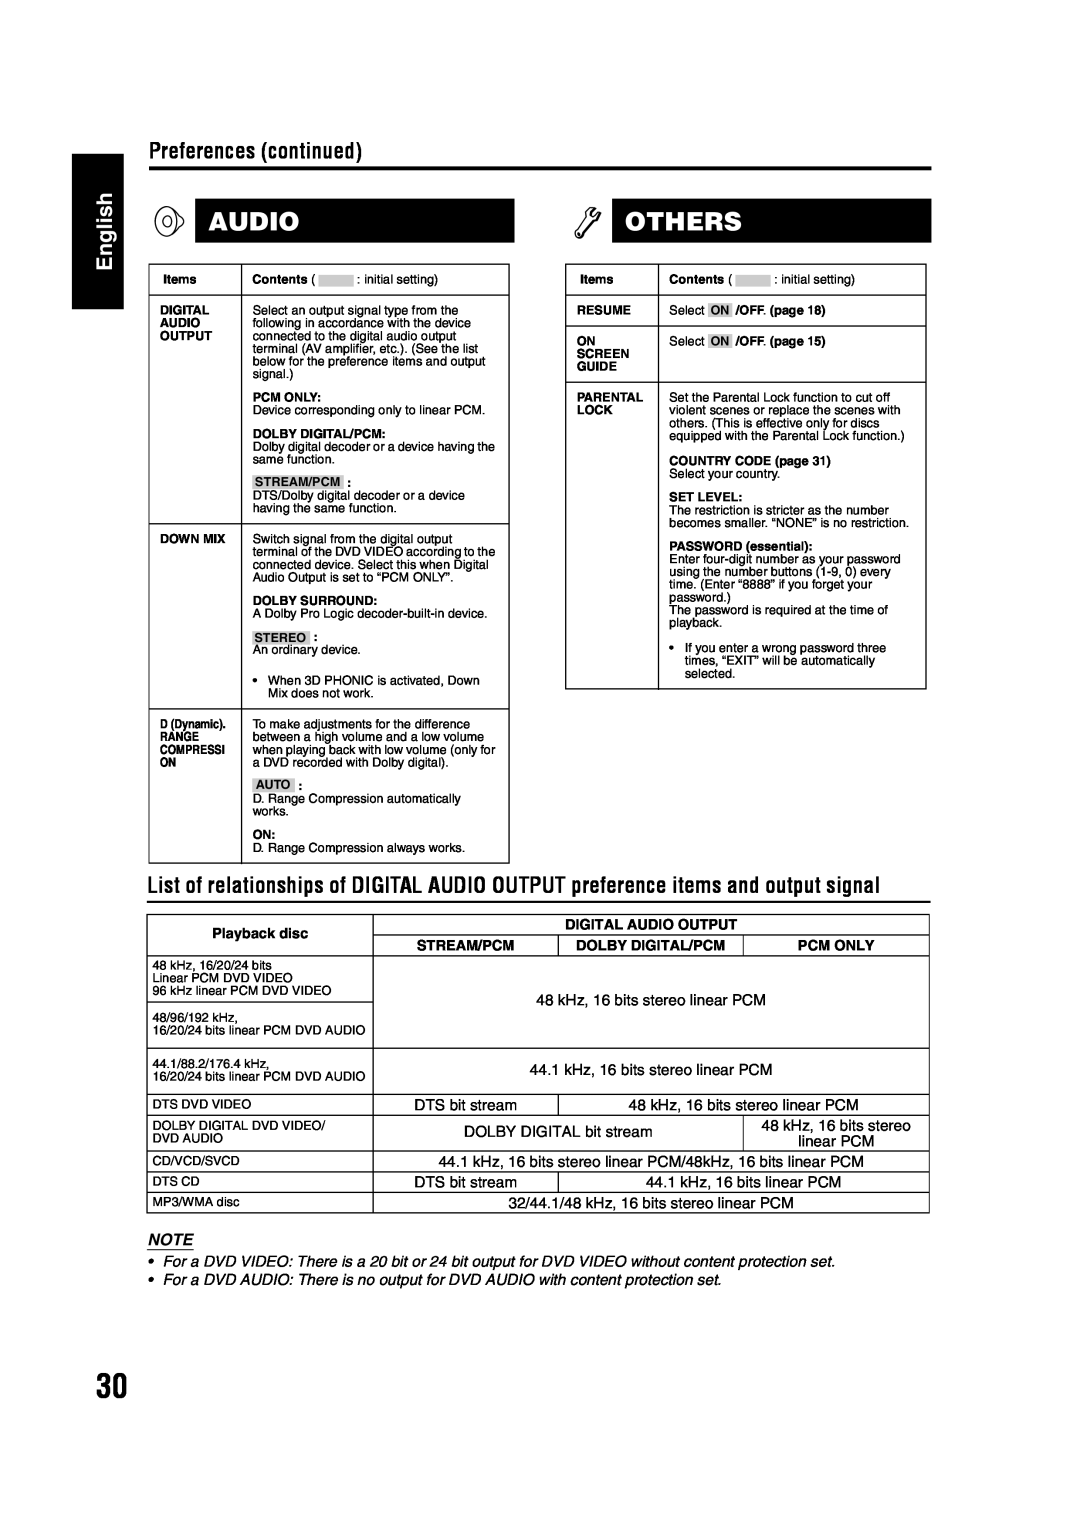 JVC GVT0142-001A manual Audio Others, English, Preferences continued, Stream/Pcm, Pcm Only 